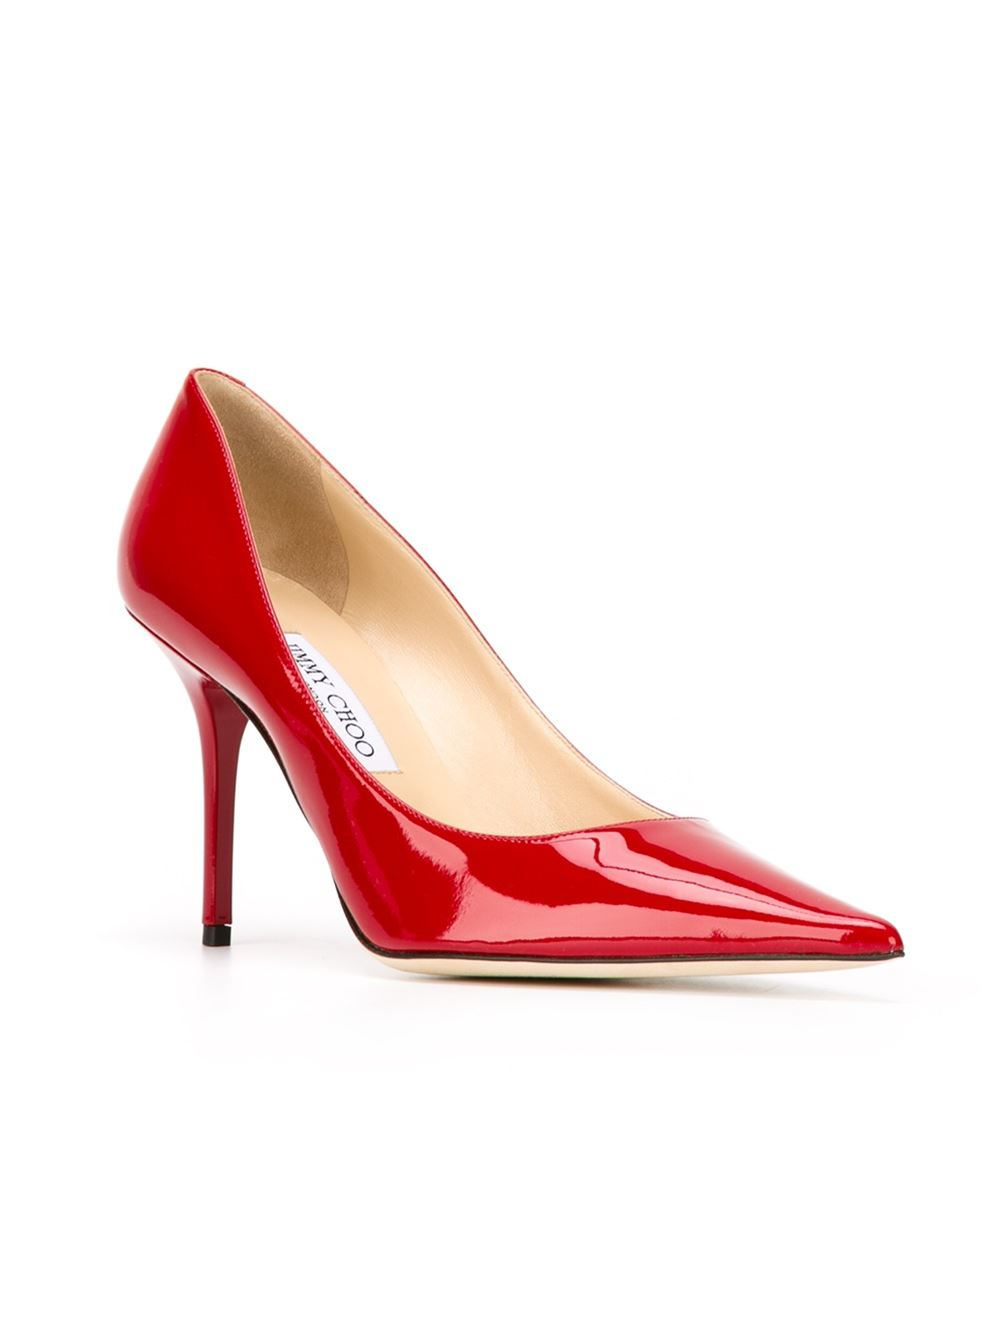 Lyst - Jimmy Choo 'agnes' Pumps in Red